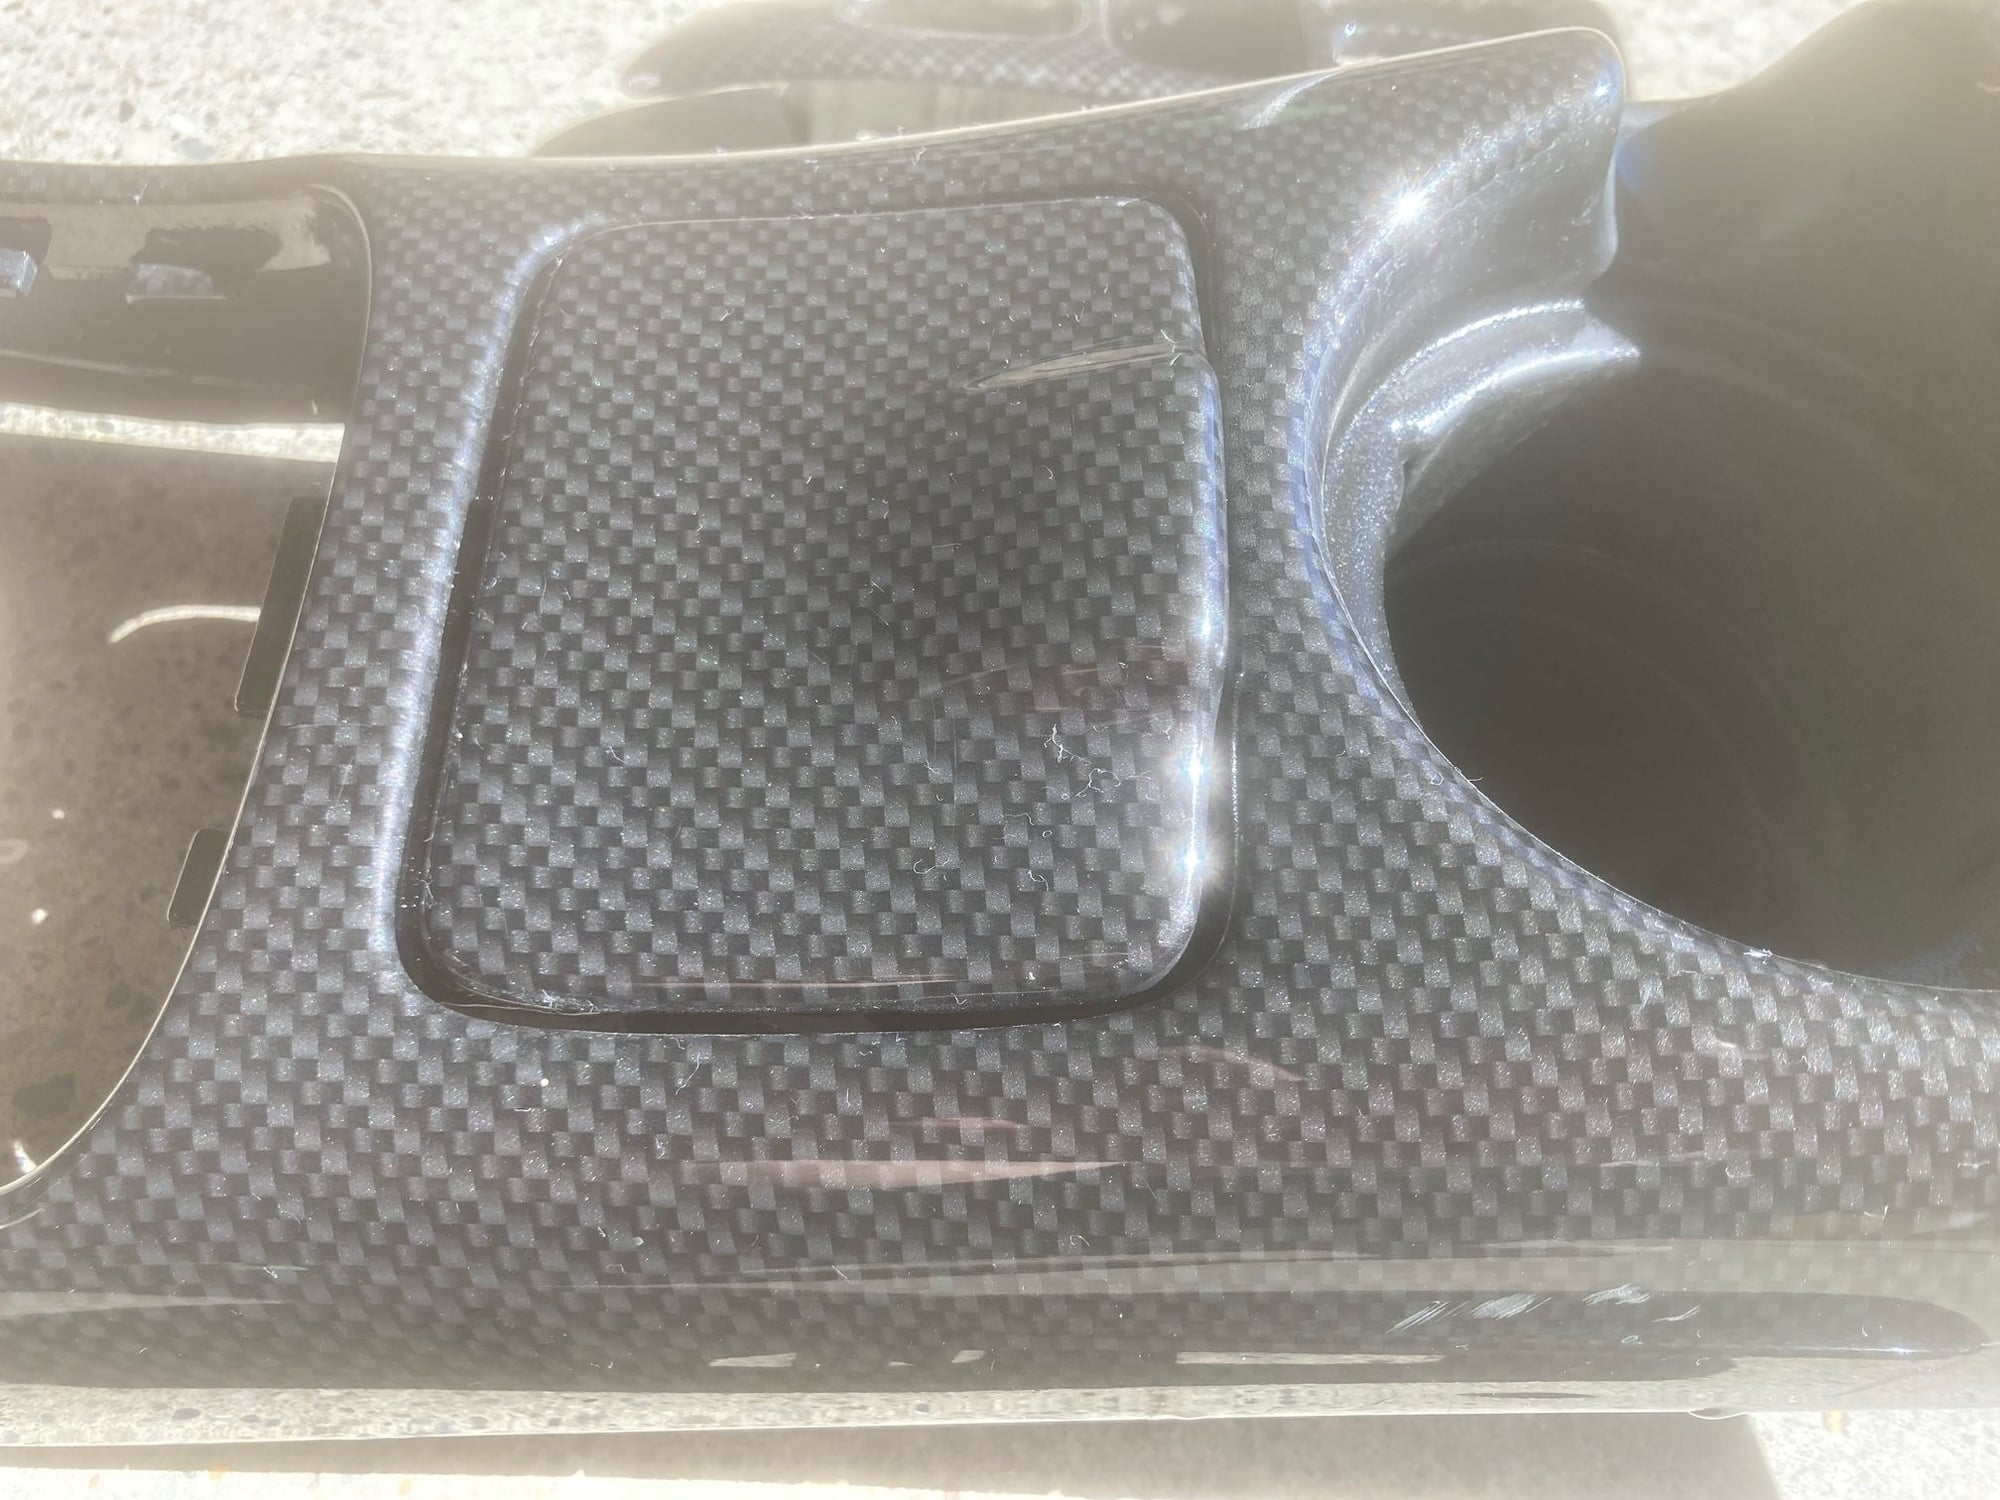 Interior/Upholstery - Firebird Hydro dipped Carbon Fiber Center Console and matching door swtich trim - Used - 1993 to 2002 Pontiac Firebird - Walnut Creek, CA 94597, United States